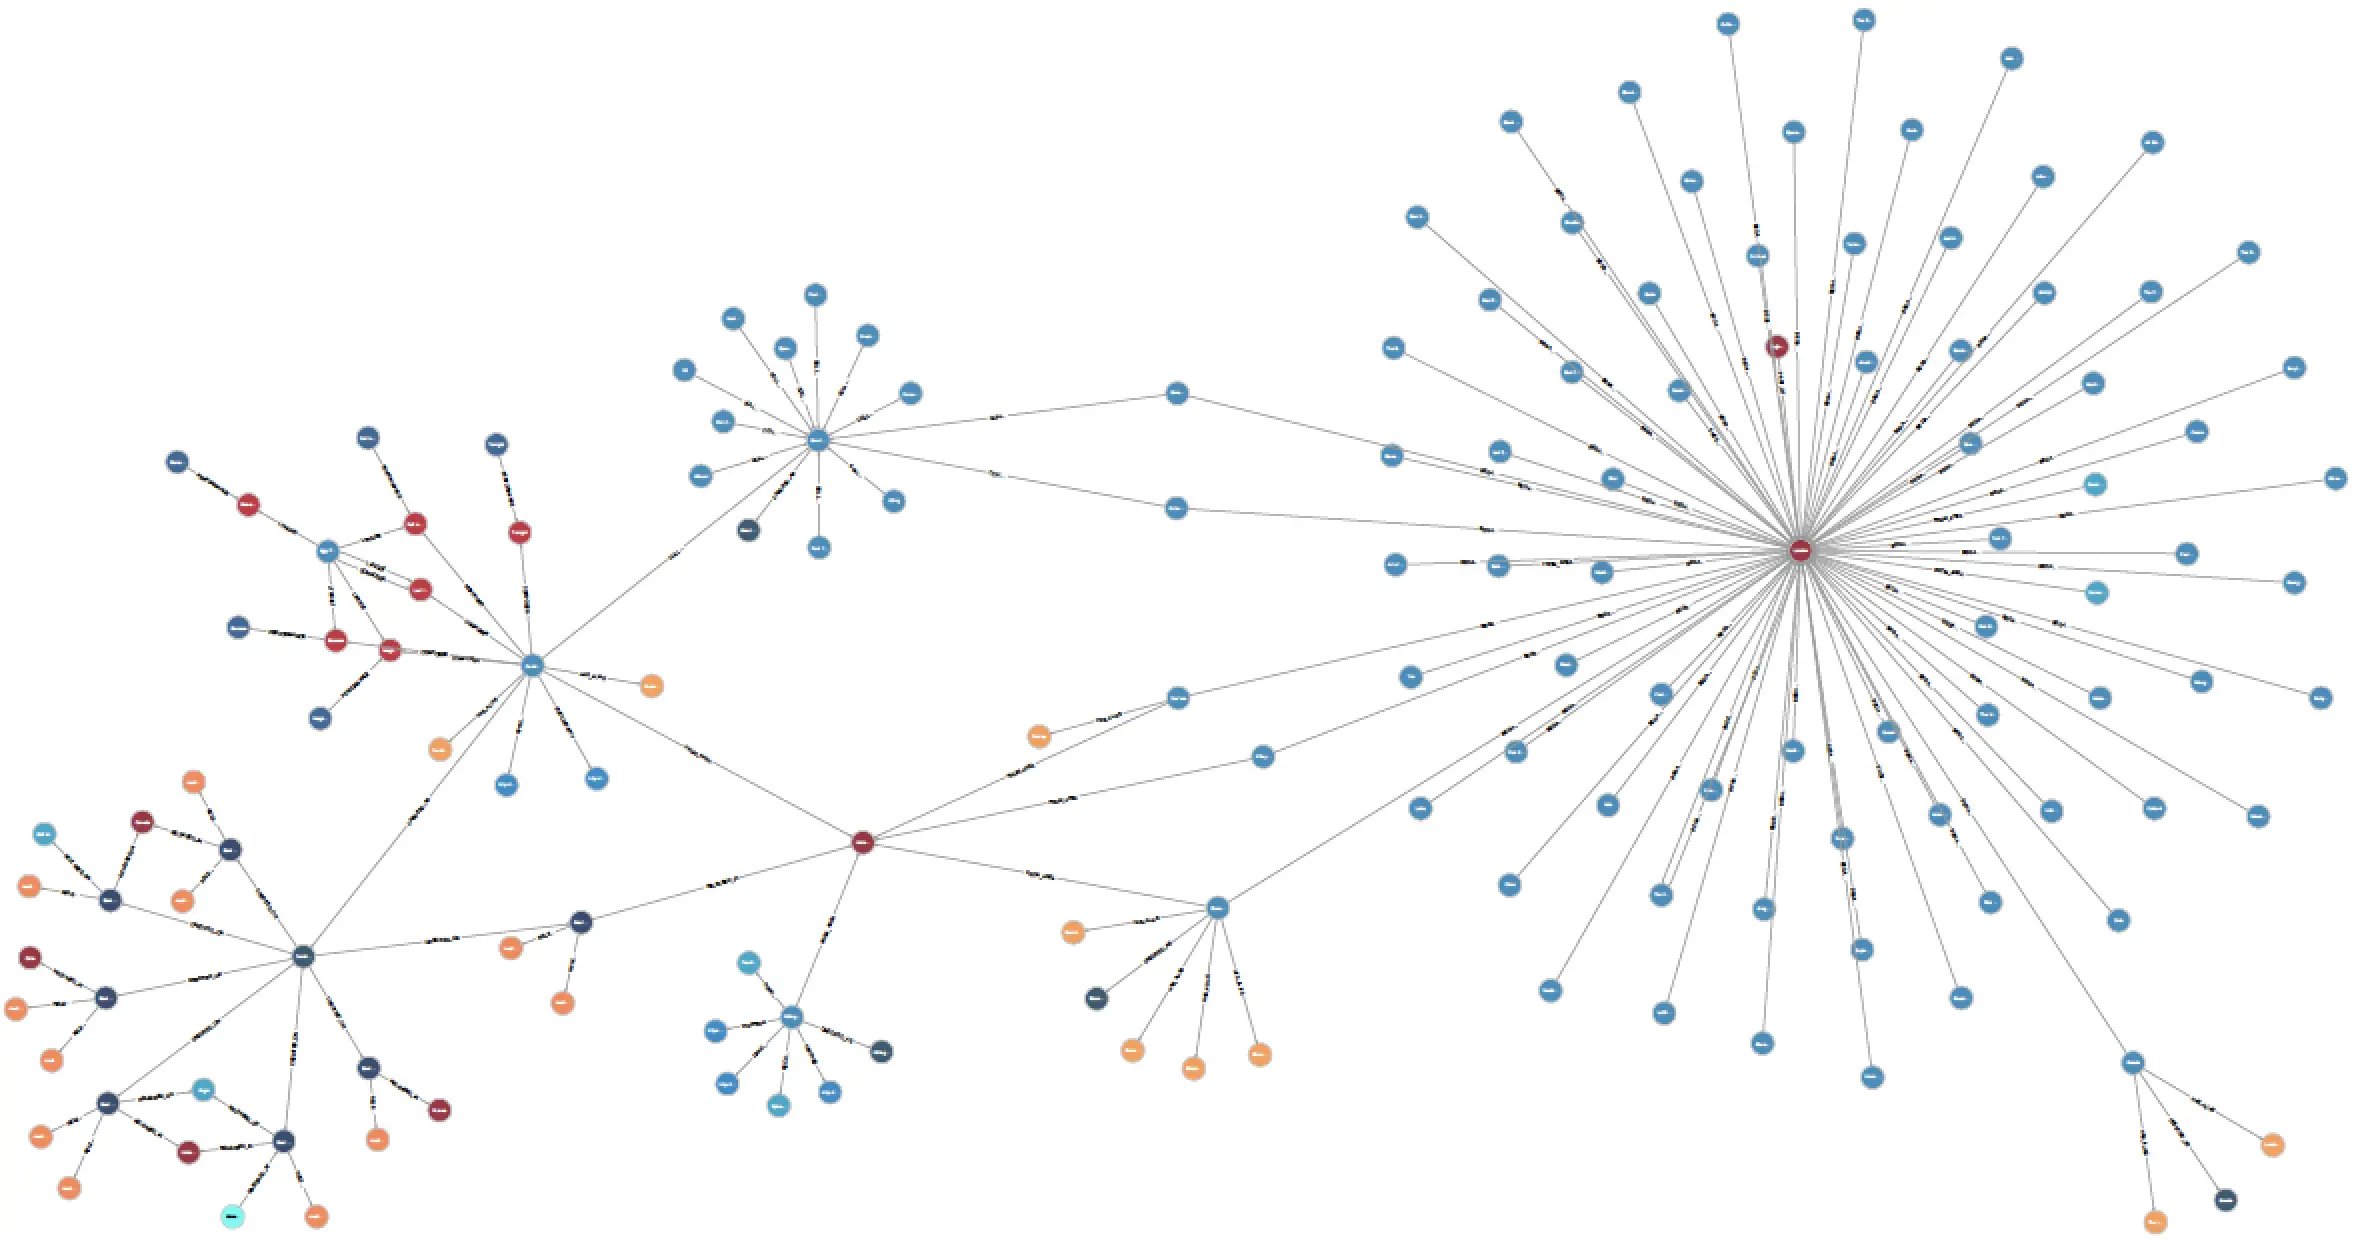 An example of unstructured data from a graph database